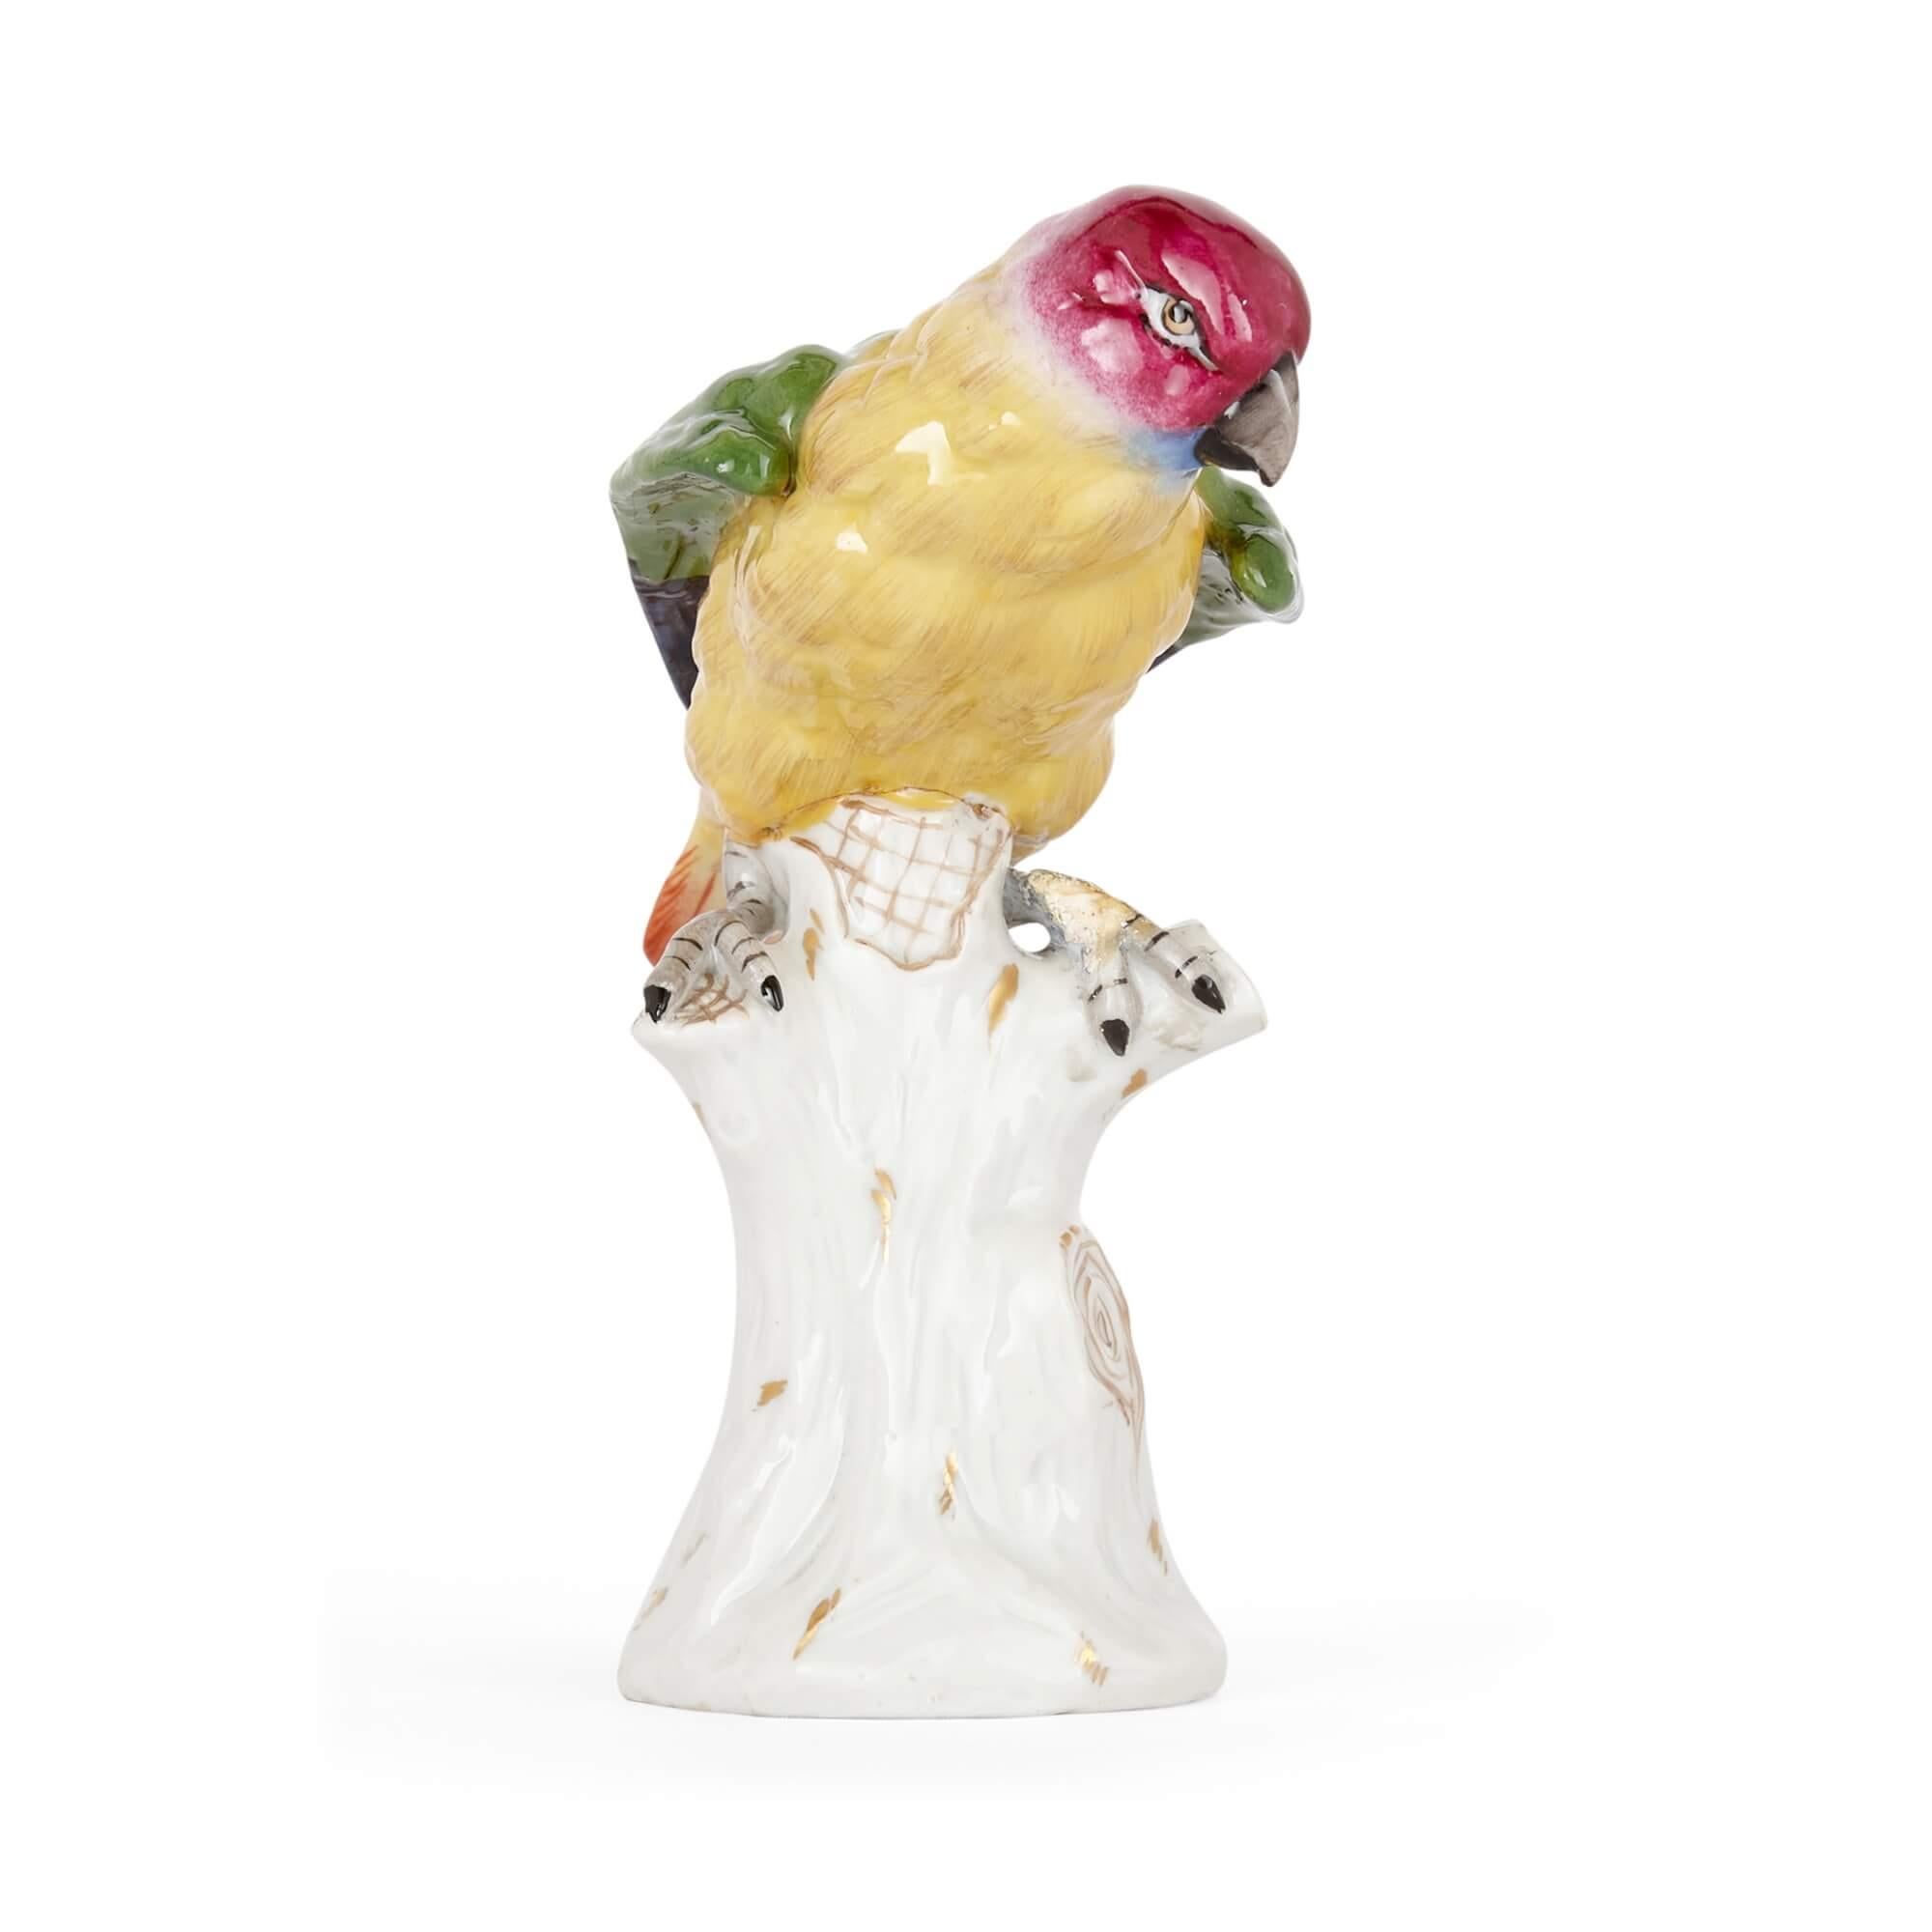 A Volkstedt porcelain model of a parrot
German, early 20th century
Measures: height 14cm, width 13cm, depth 6cm

This bold, bright, and beautiful porcelain bird model of a parrot was made by the German makers Volkstedt, or Aelteste Volkstedter